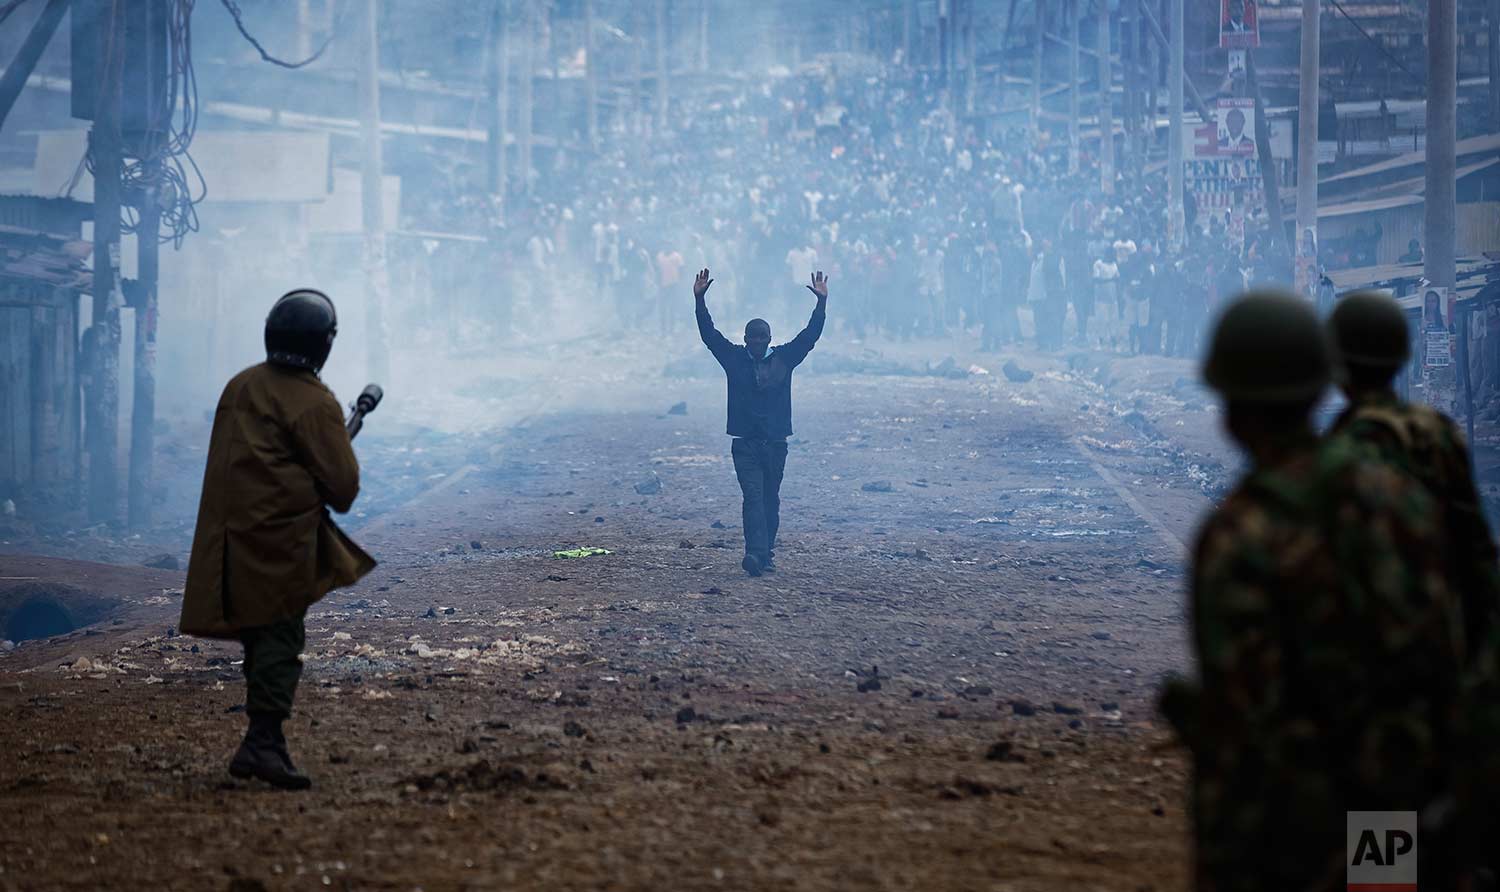  In this Thursday, Aug. 10, 2017 photo, a man seeking safety walks with his hands in the air through a thick cloud of tear gas towards riot police, as they clash with protesters throwing rocks in the Kawangware slum of Nairobi, Kenya. International o